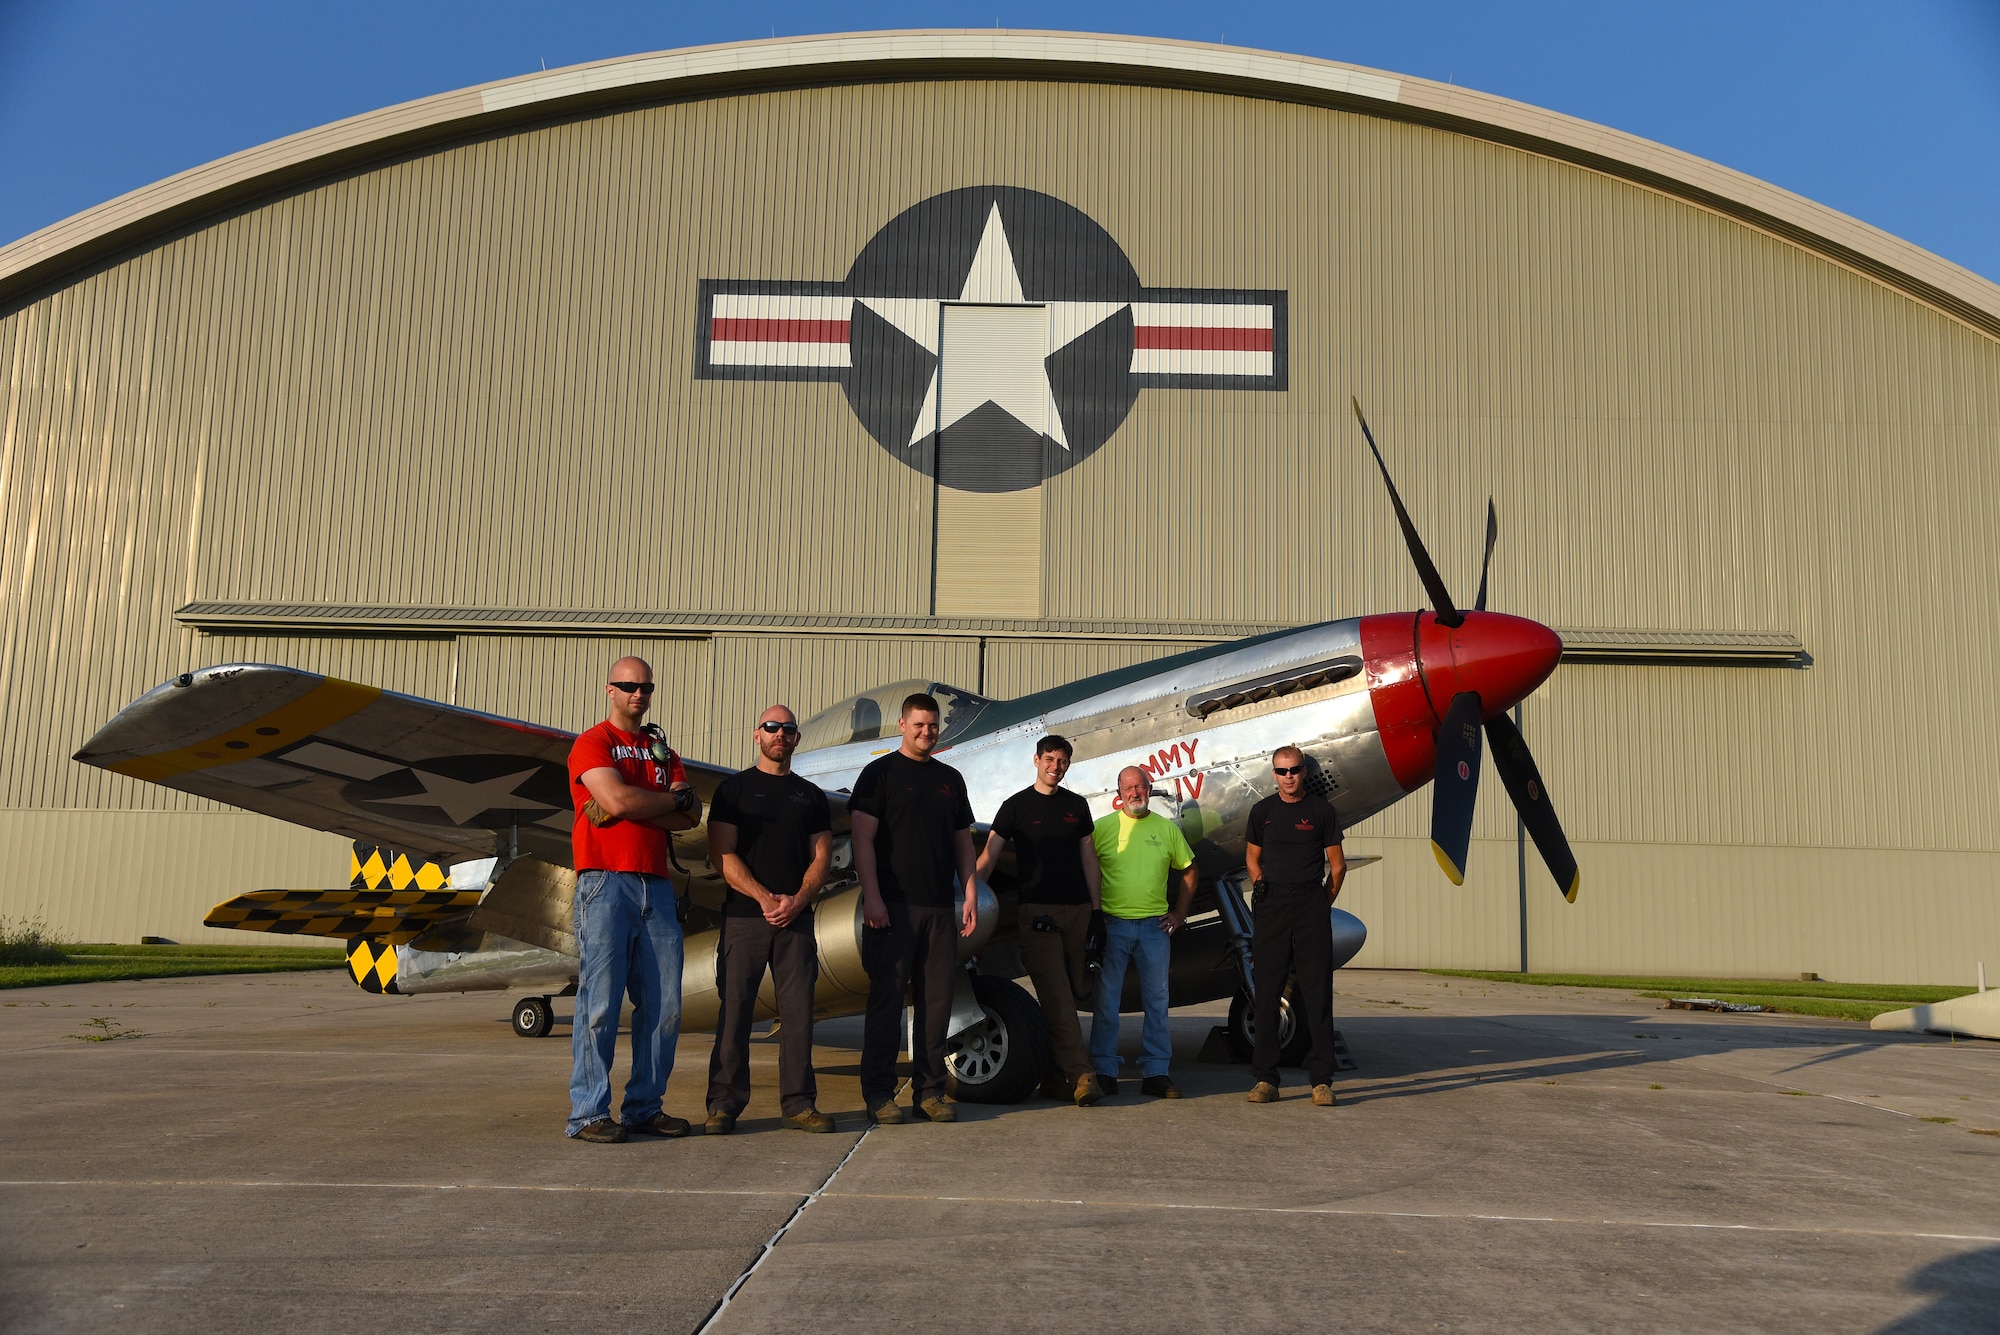 Museum restoration specialists(from left to right) Adam Naber, Chase Meredith, Nick Almeter, Casey Simmons, Roger Brigner, and Brian Lindamood pose for a photo with the North American P-51D Mustang at the National Museum of the U.S. Air Force on Aug. 14, 2018. They are well versed in a variety of skills ranging from machine and woodworking expertise to precision craftsmanship in sheet metal and painting. Their knowledge of aircraft spans years of technology -- from World War I fabric covered aircraft to the elite fighters of today's Air Force. (U.S. Air Force photo by Ken LaRock)